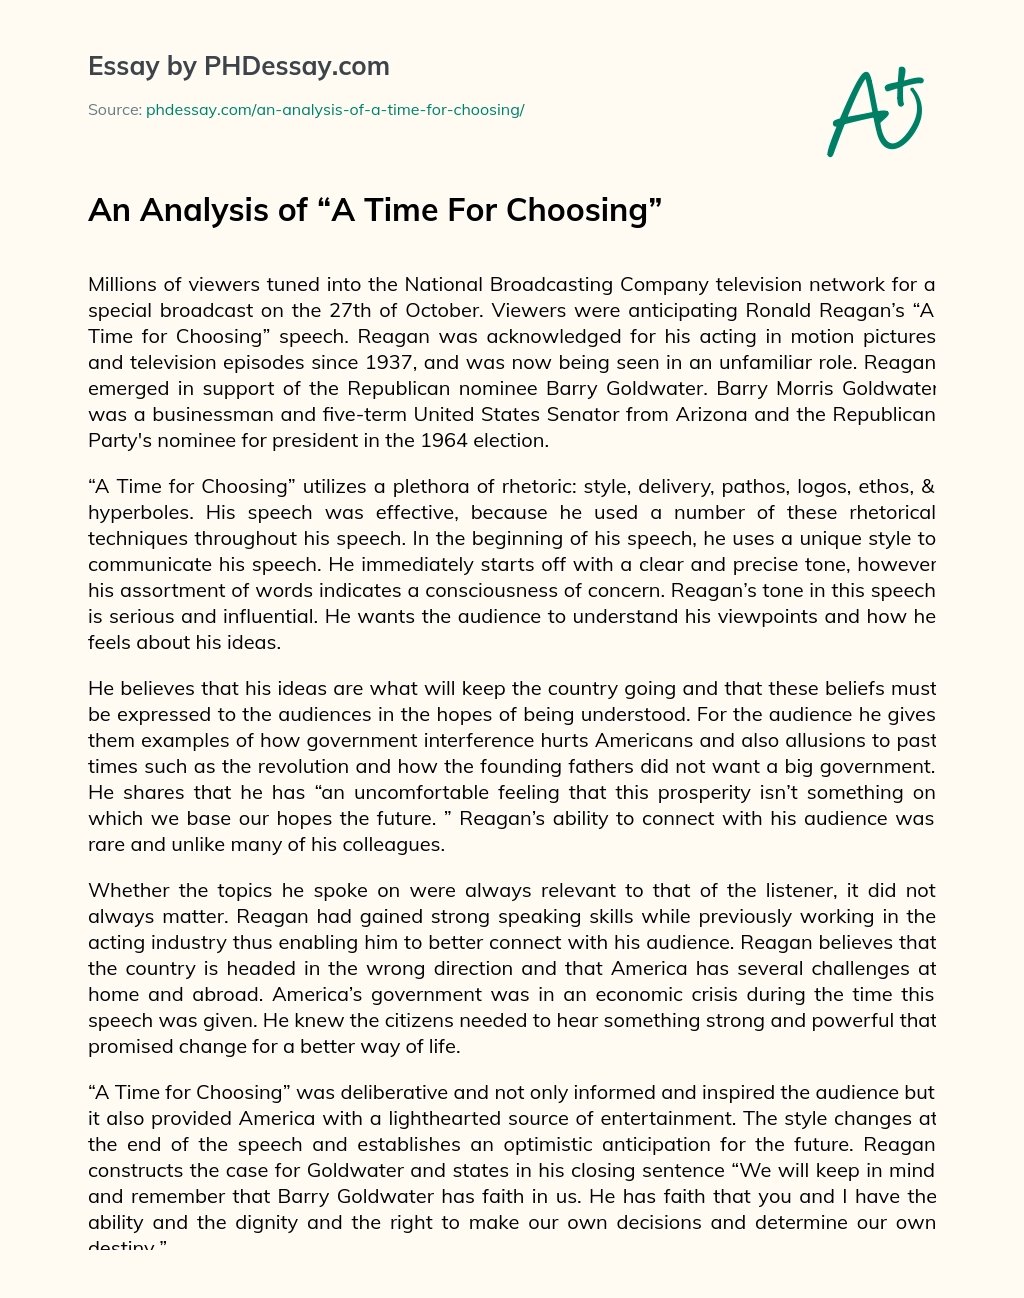 An Analysis of “A Time For Choosing” essay